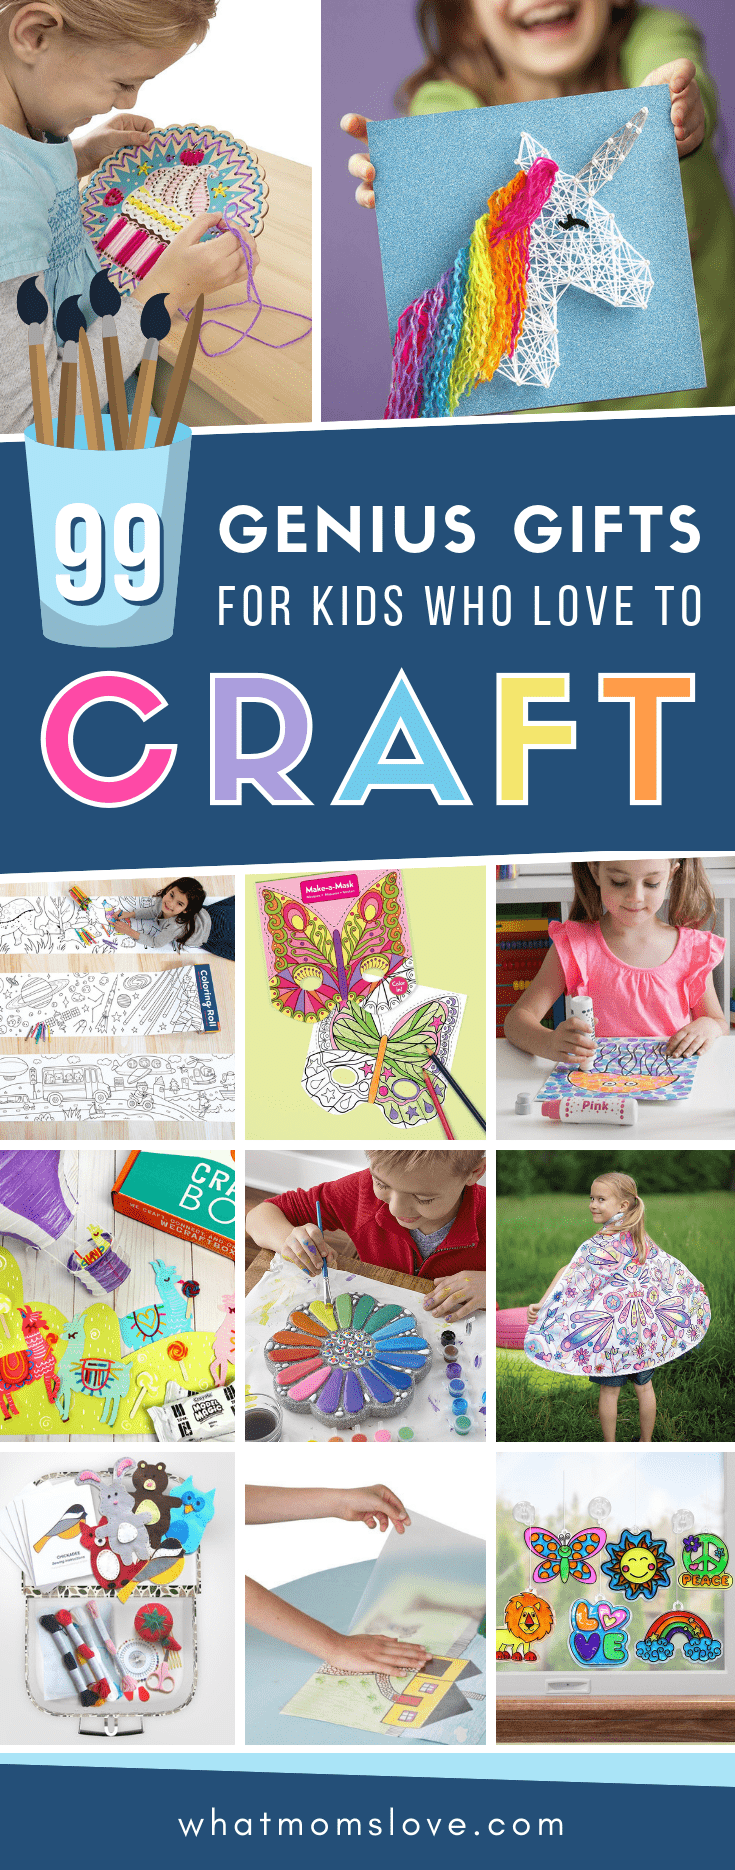 https://cdn.whatmomslove.com/wp-content/uploads/2018/10/99-Genius-Gifts-for-Kids-who-love-to-craft-arts-and-crafts-gift-guide-MAIN-PIN.png